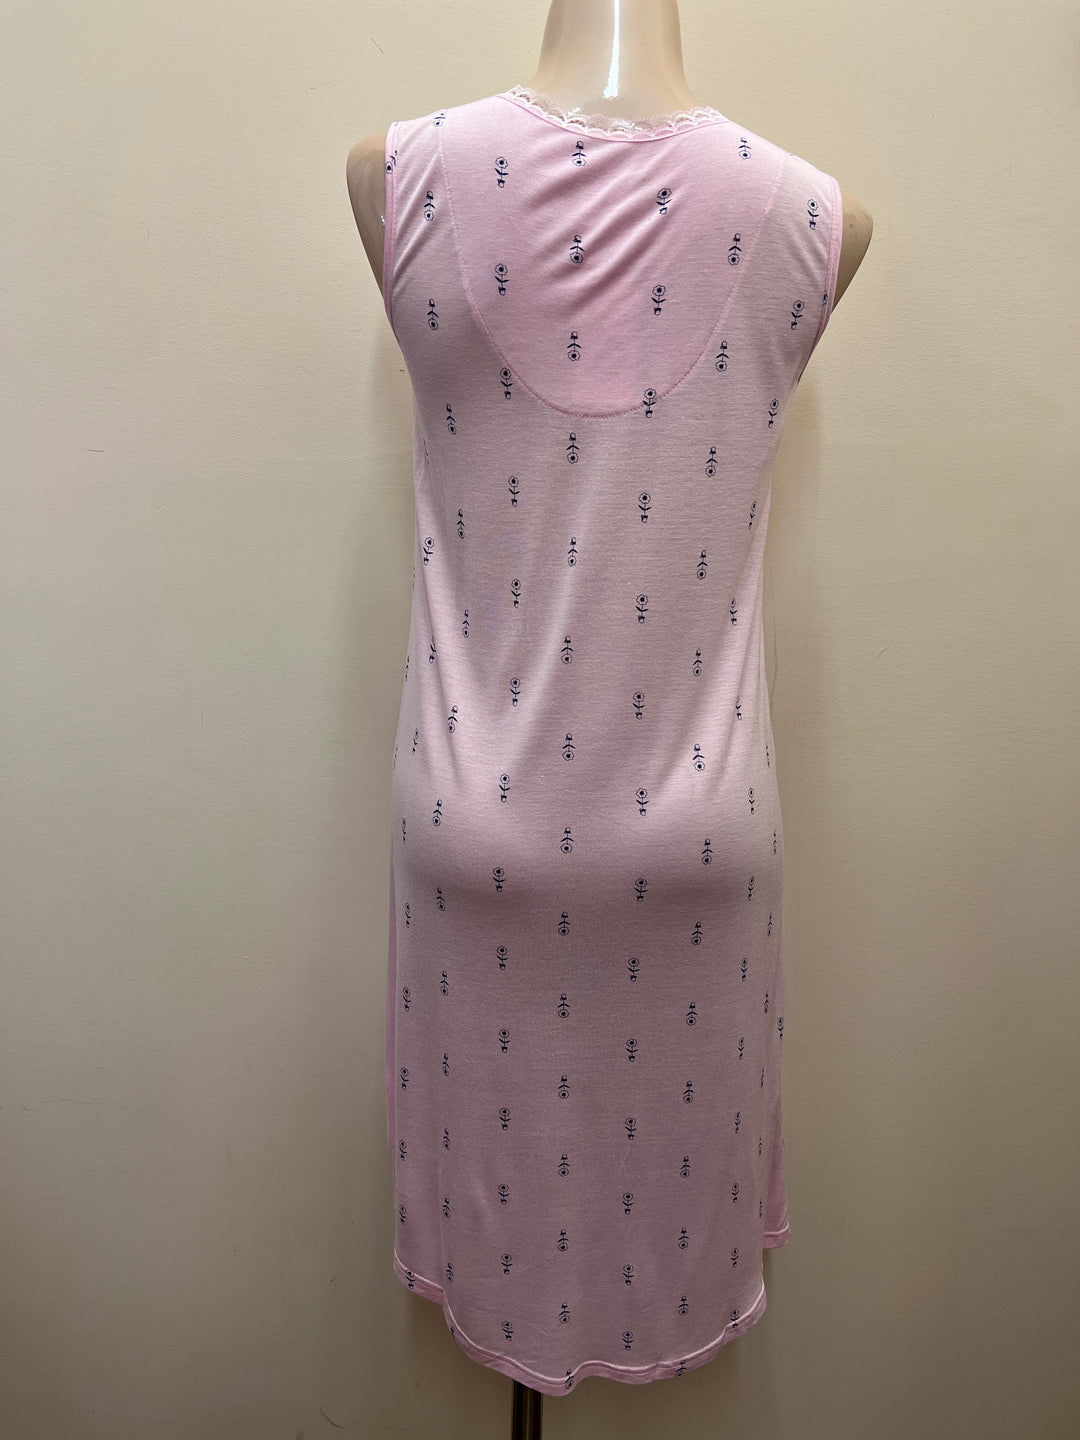 Petite Floral Sleeveless Nightgown - Size X-Large